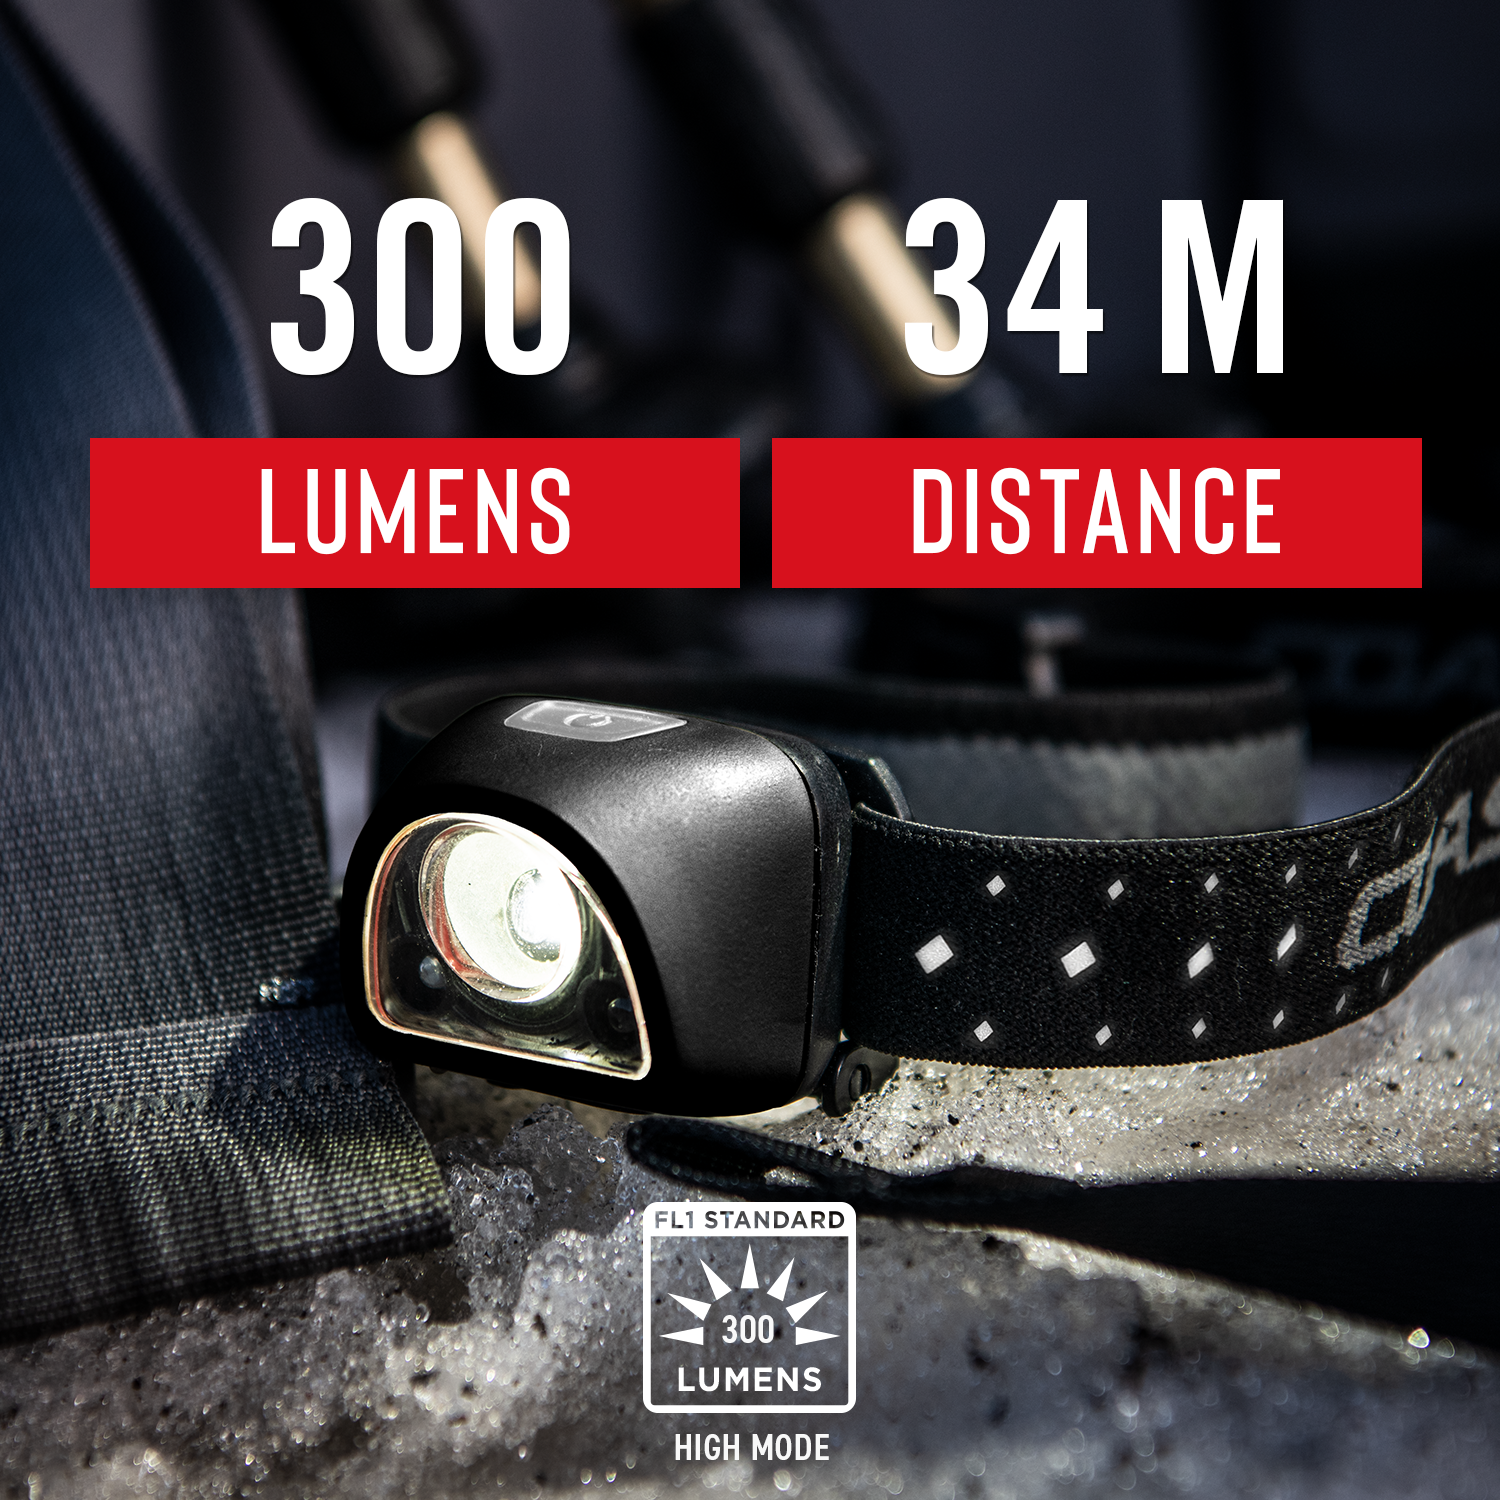 COAST FL1R 300 Lumen Ultralight Rechargeable Headlamp with Red LED – Products